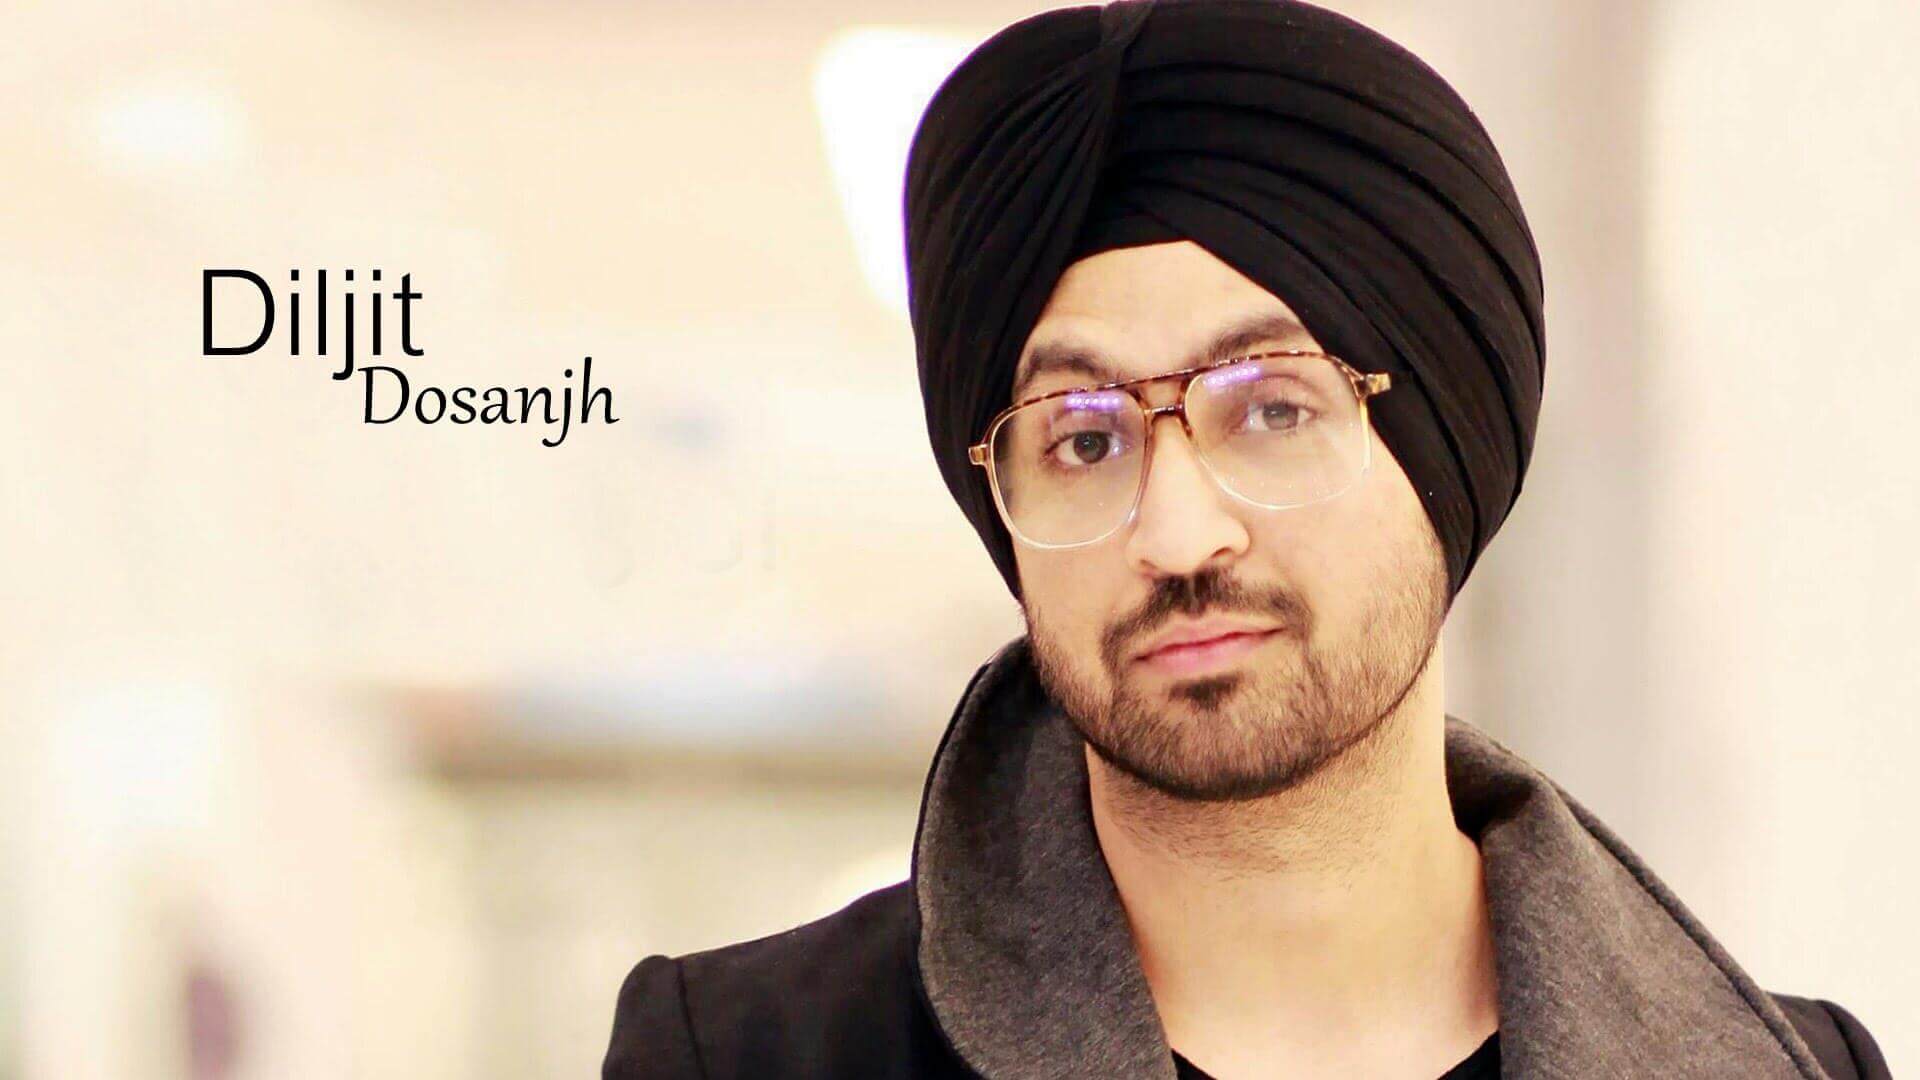 How to Meet Diljit Dosanjh in Person